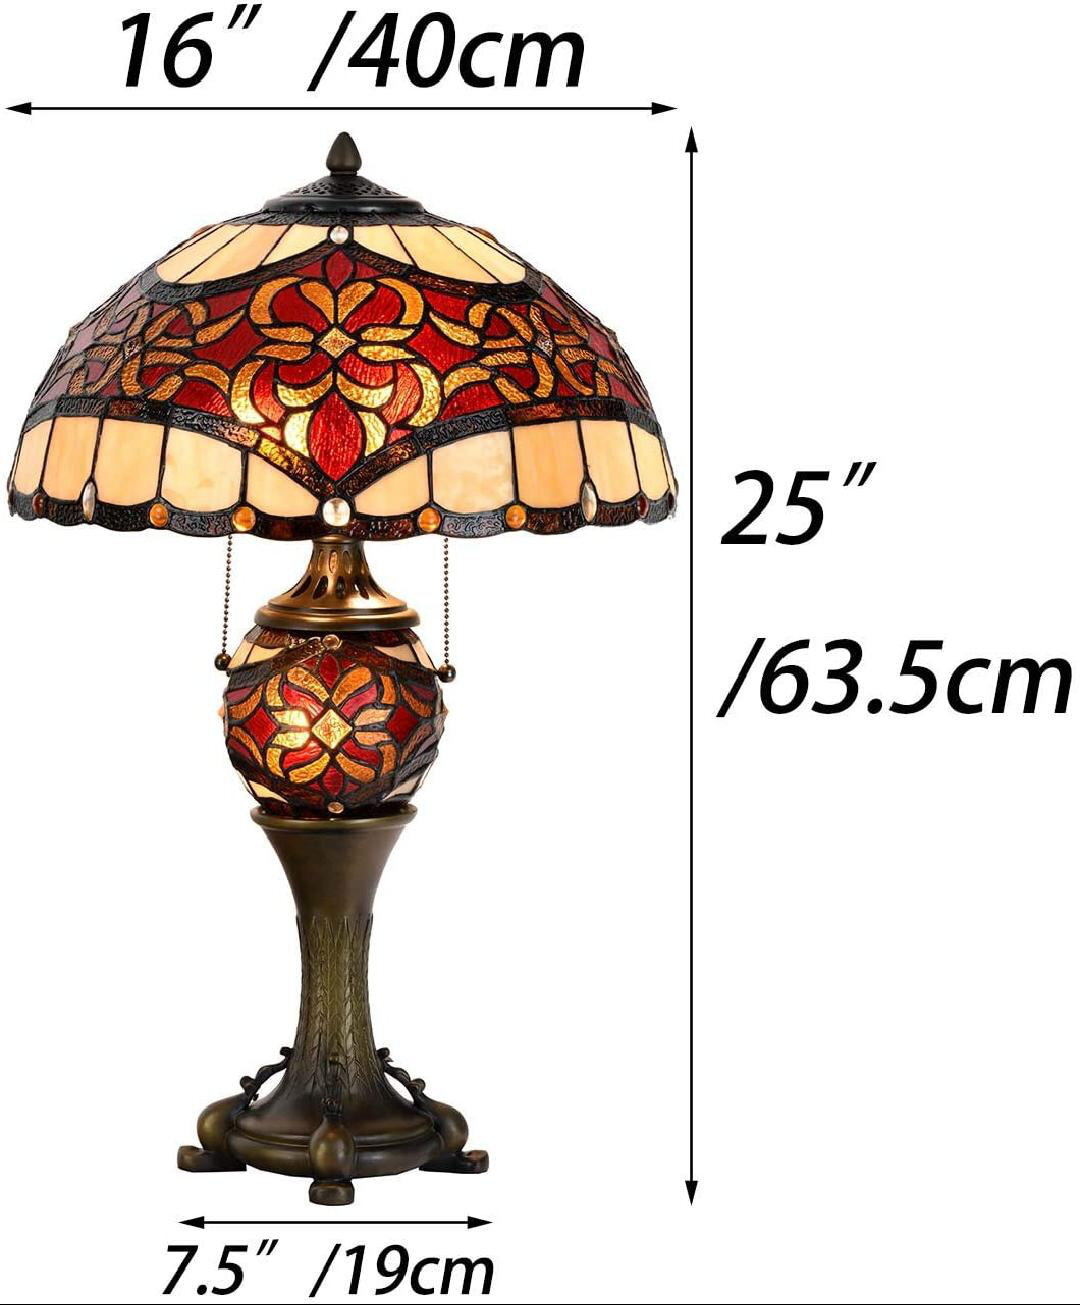 L10802 Baroque Tiffany Style Stained Glass Table Lamp Lighted Base 25 Inches Tall, Red